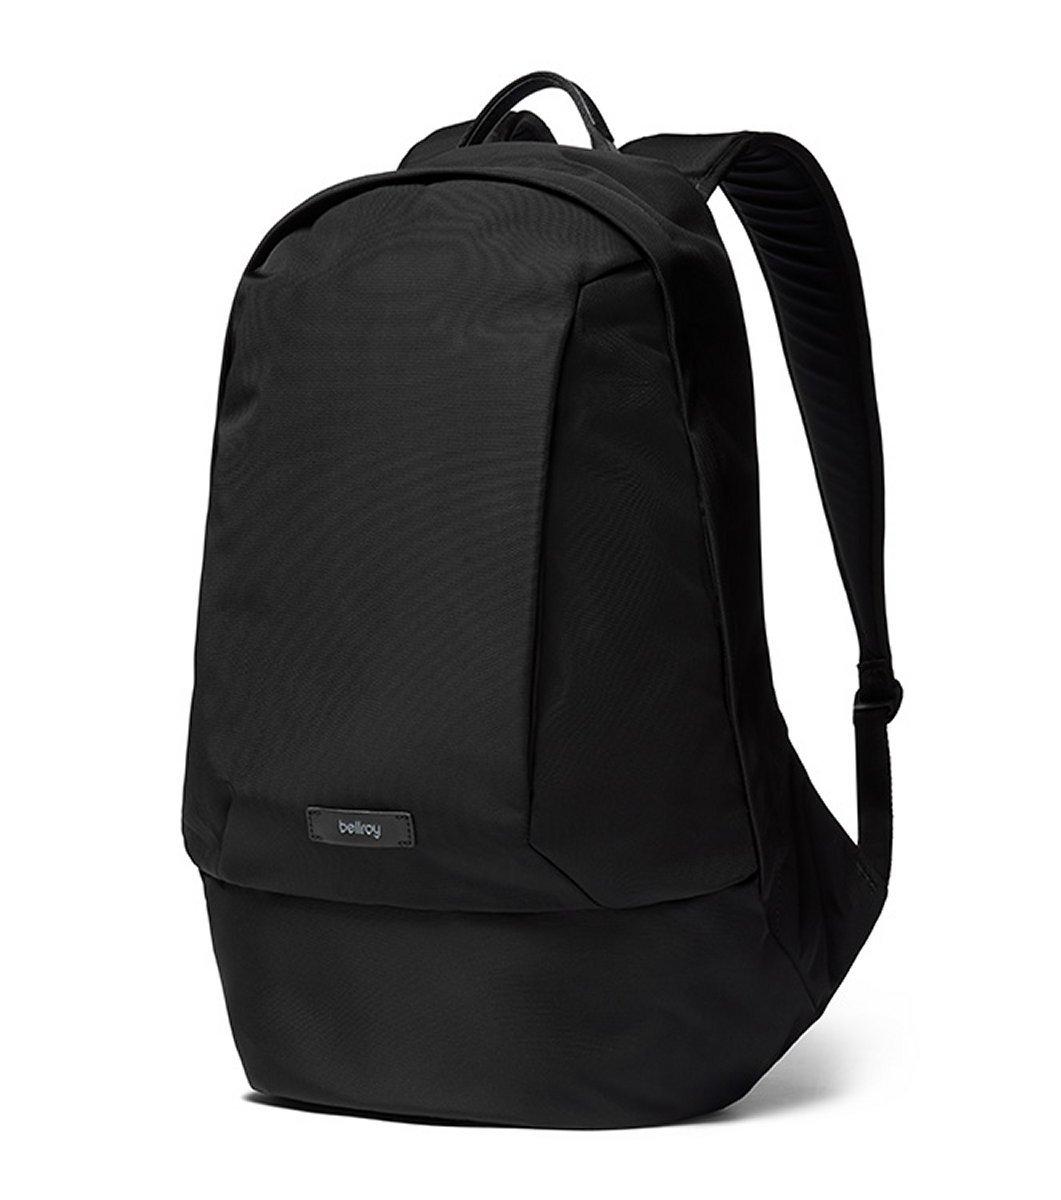 Image of bellroy Classic Backpack Black